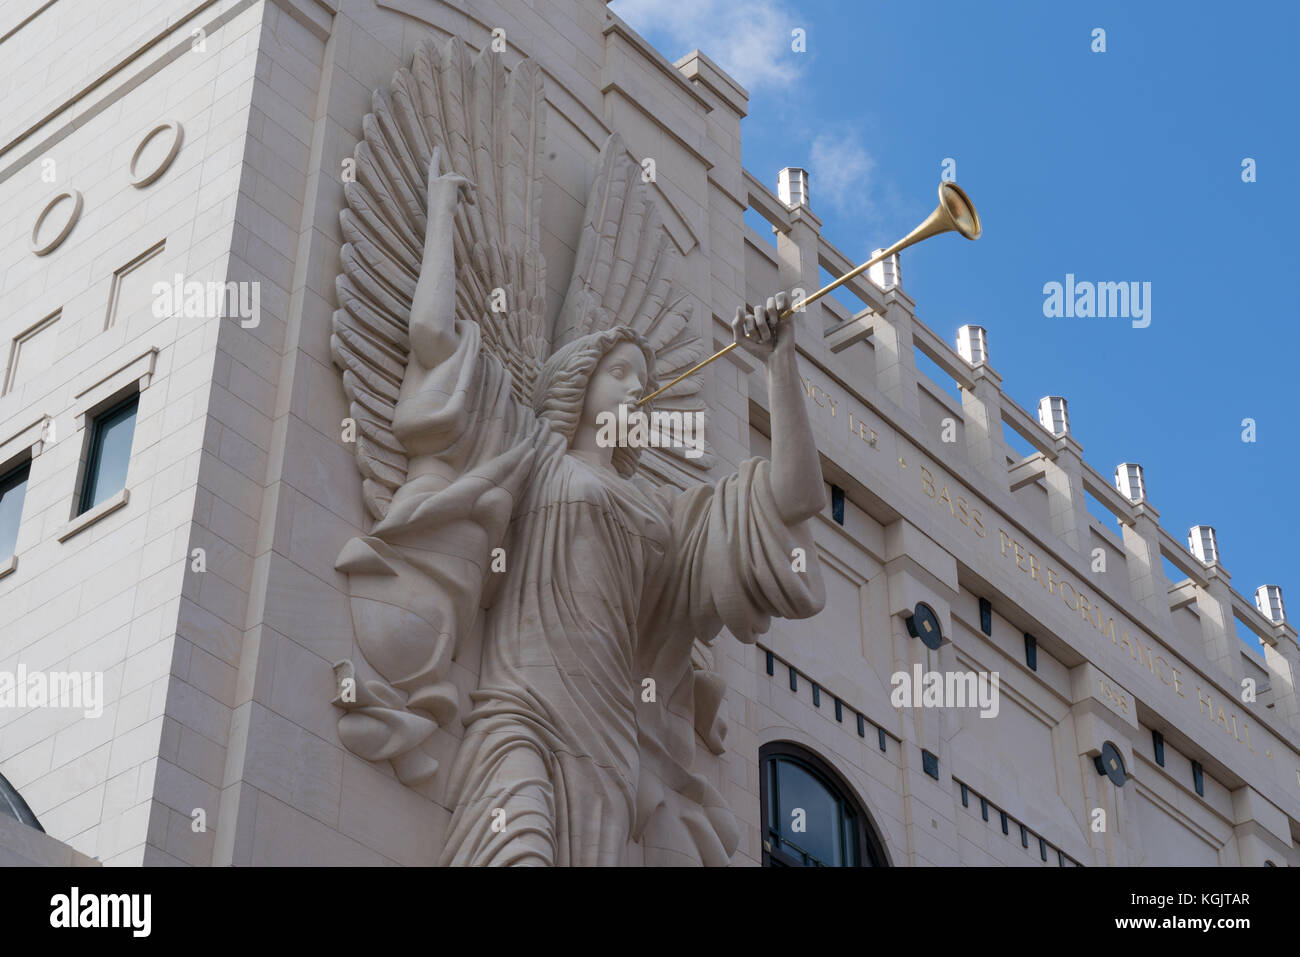 FORT WORTH, TX - MAY 12: Trumpeting Angel sculpture on the facade of Bass Performance Hall in Fort Worth, TX on May 12, 2017 Stock Photo